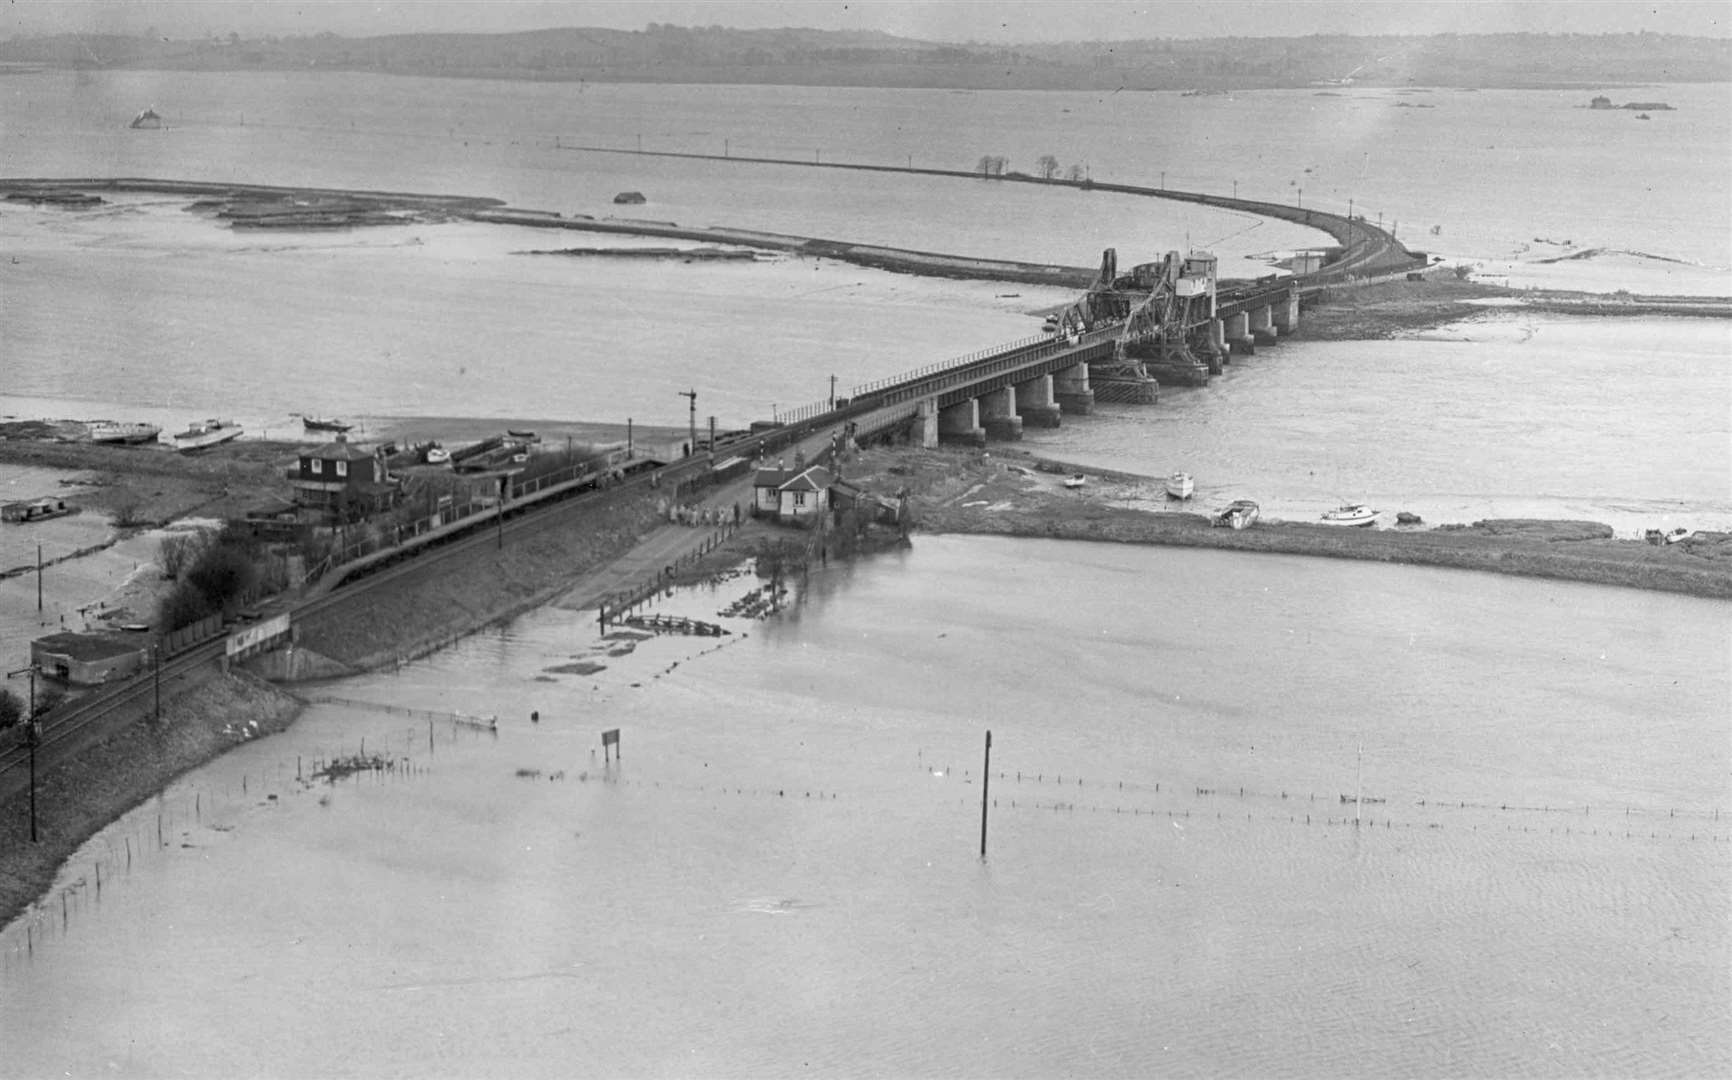 The Isle of Sheppey was completely cut off, isolating its 25,000 inhabitants. Here is the Kingsferry bridge.